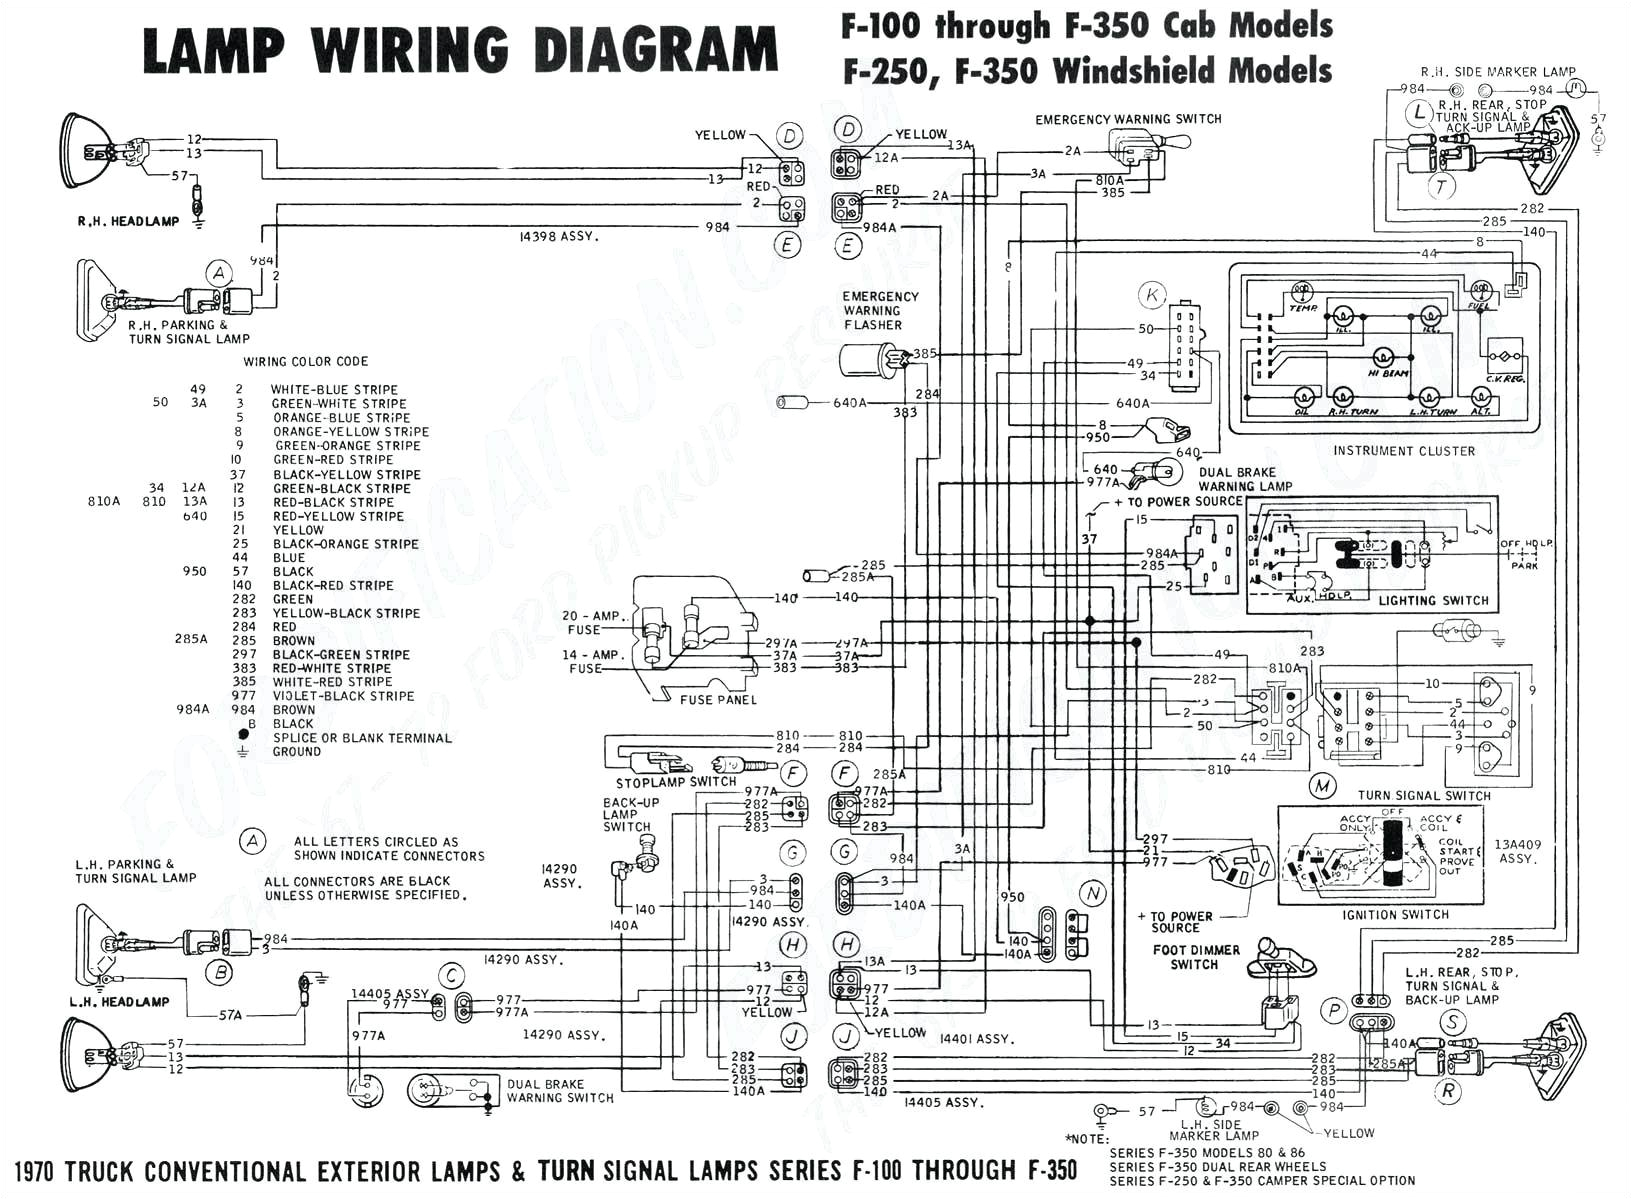 97 accord wiring diagram wiring diagram centre1997 jeep grand cherokee fuse diagram wiring diagram centre93 jeep